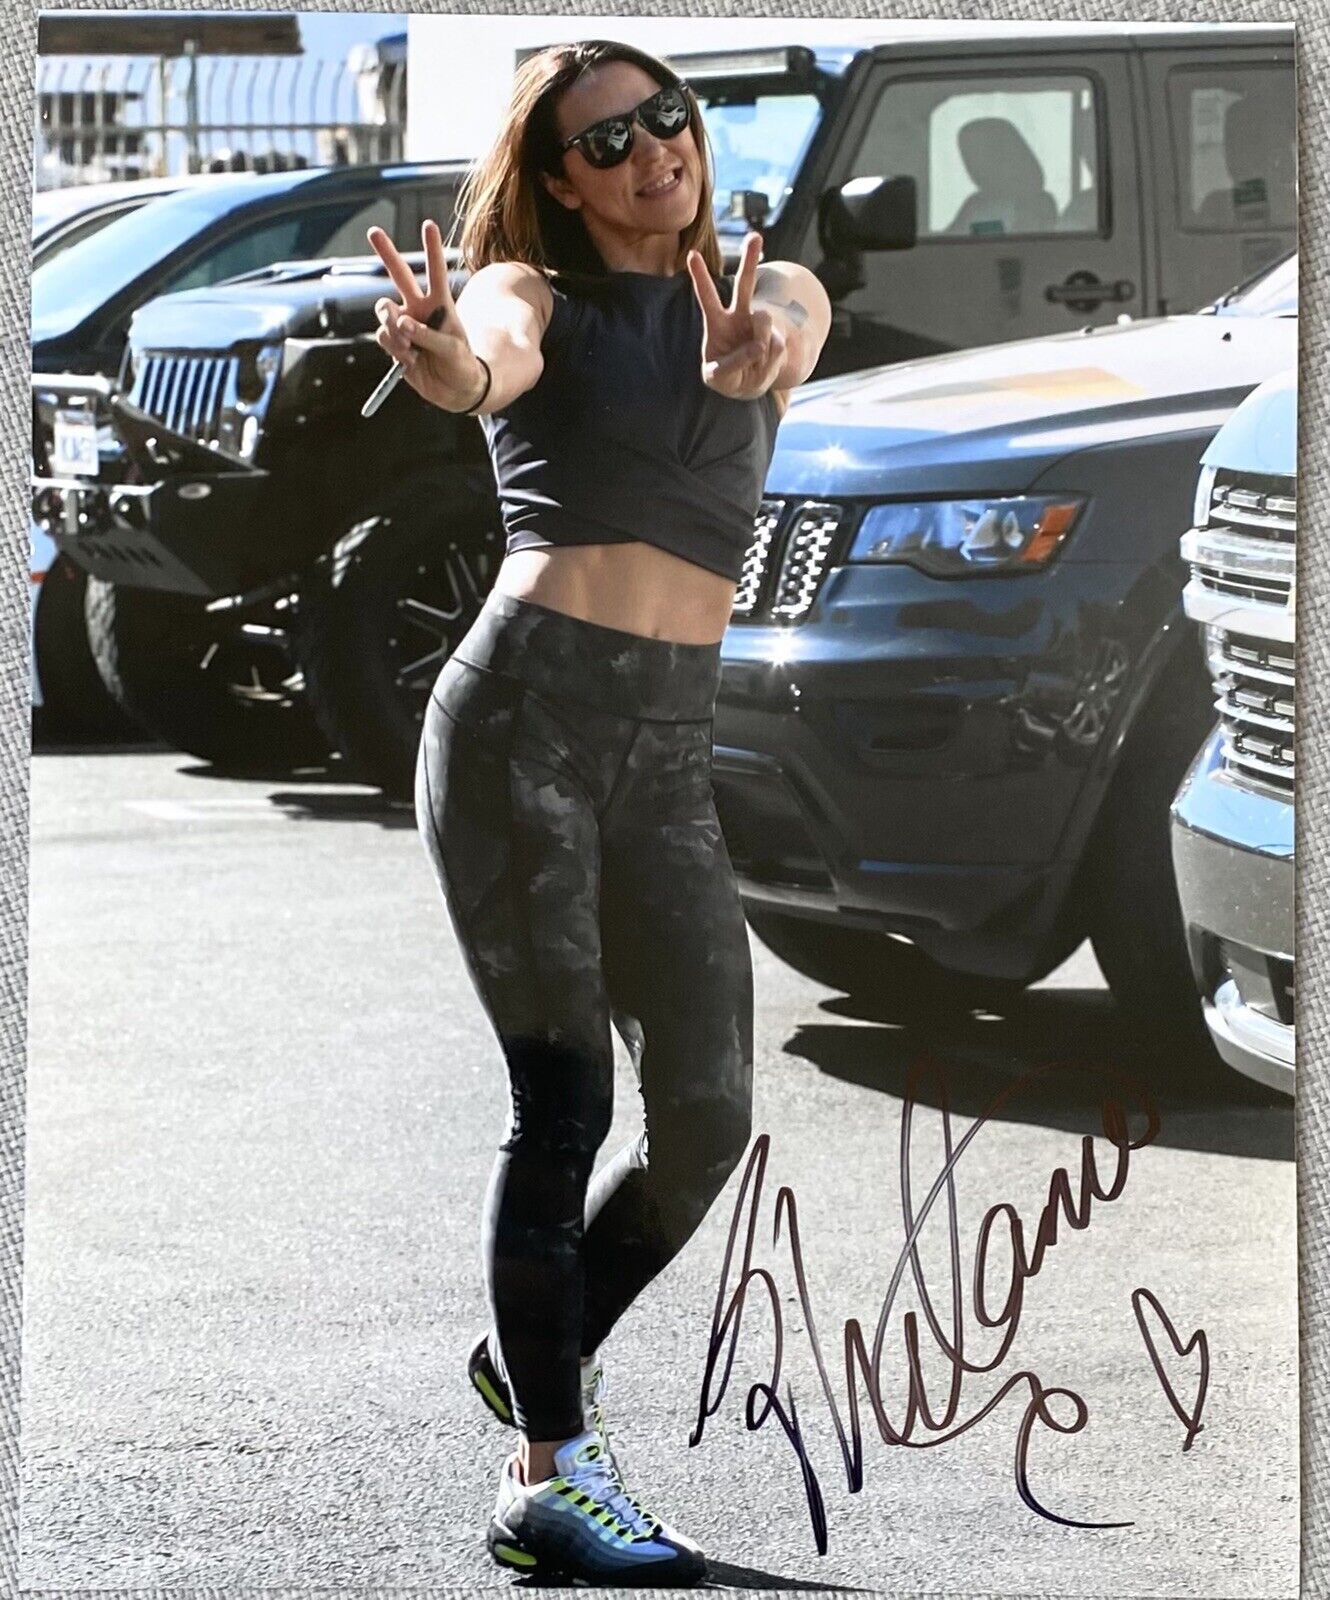 Sporty Spice Melanie C Signed In Person 8x10 Photo - Spice Girls, Authentic 